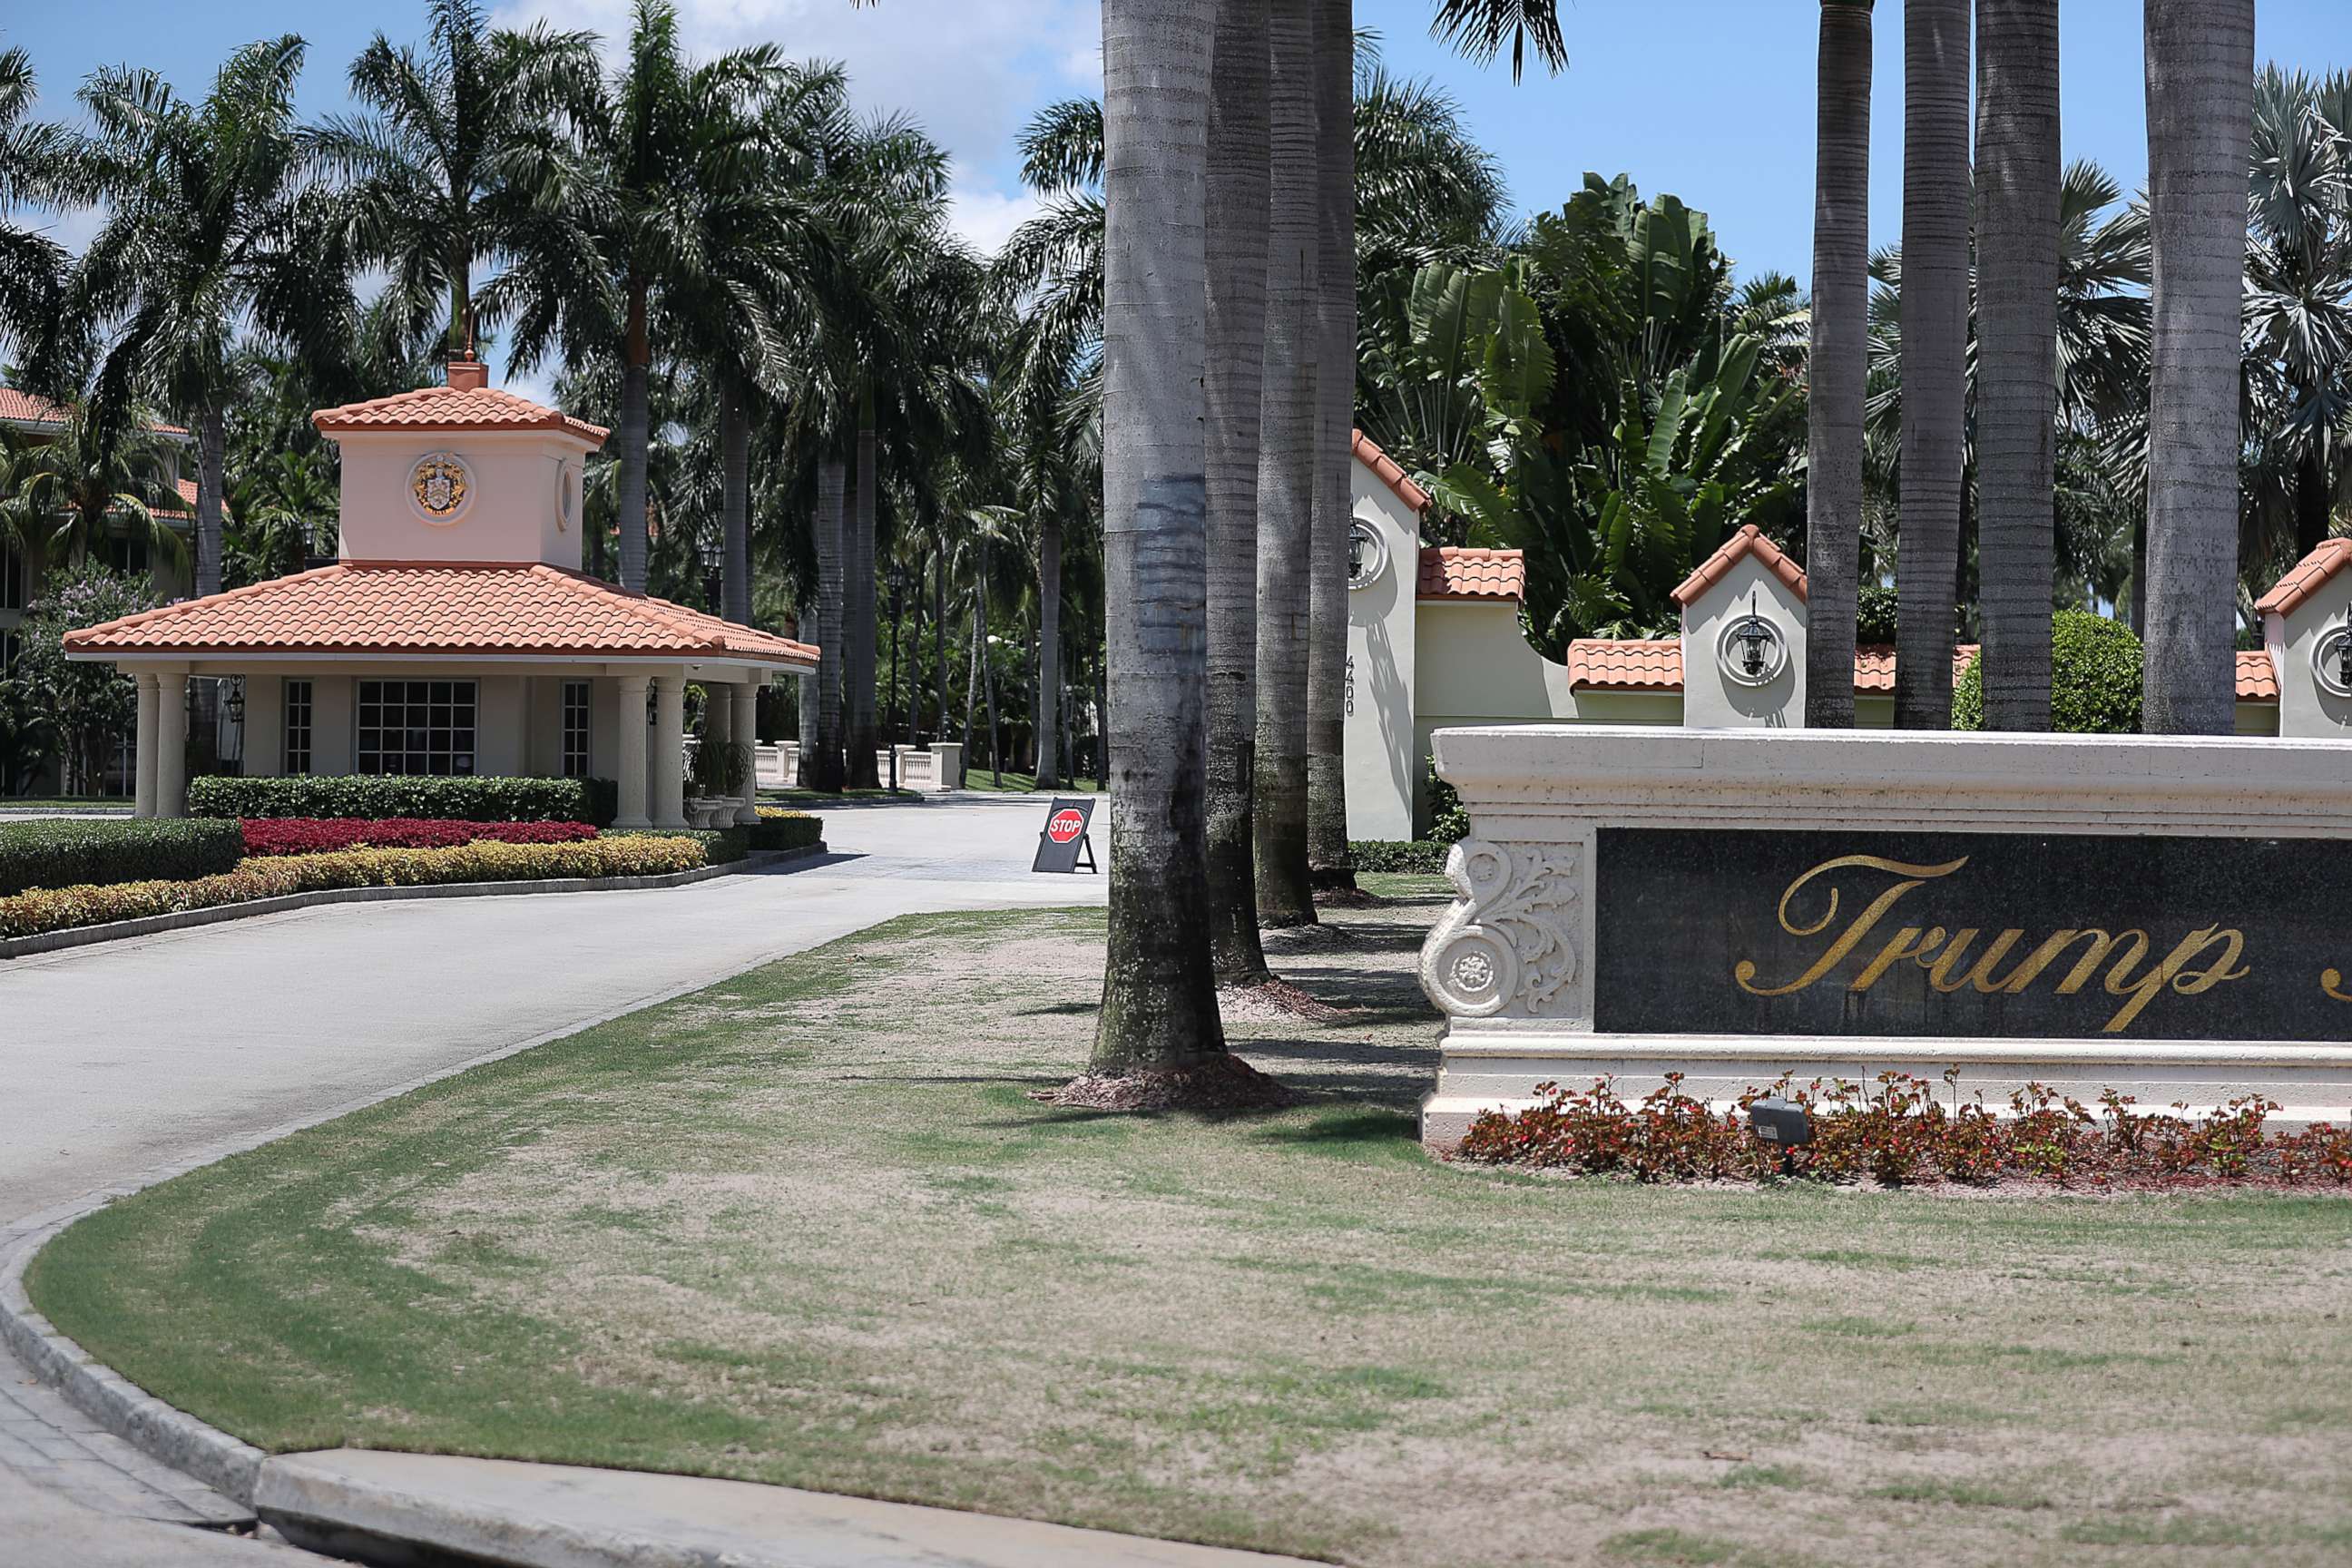 PHOTO: The front entrance at the Trump National Doral golf resort owned by President Donald Trump's company, Aug. 27, 2019 in Doral, Fla.